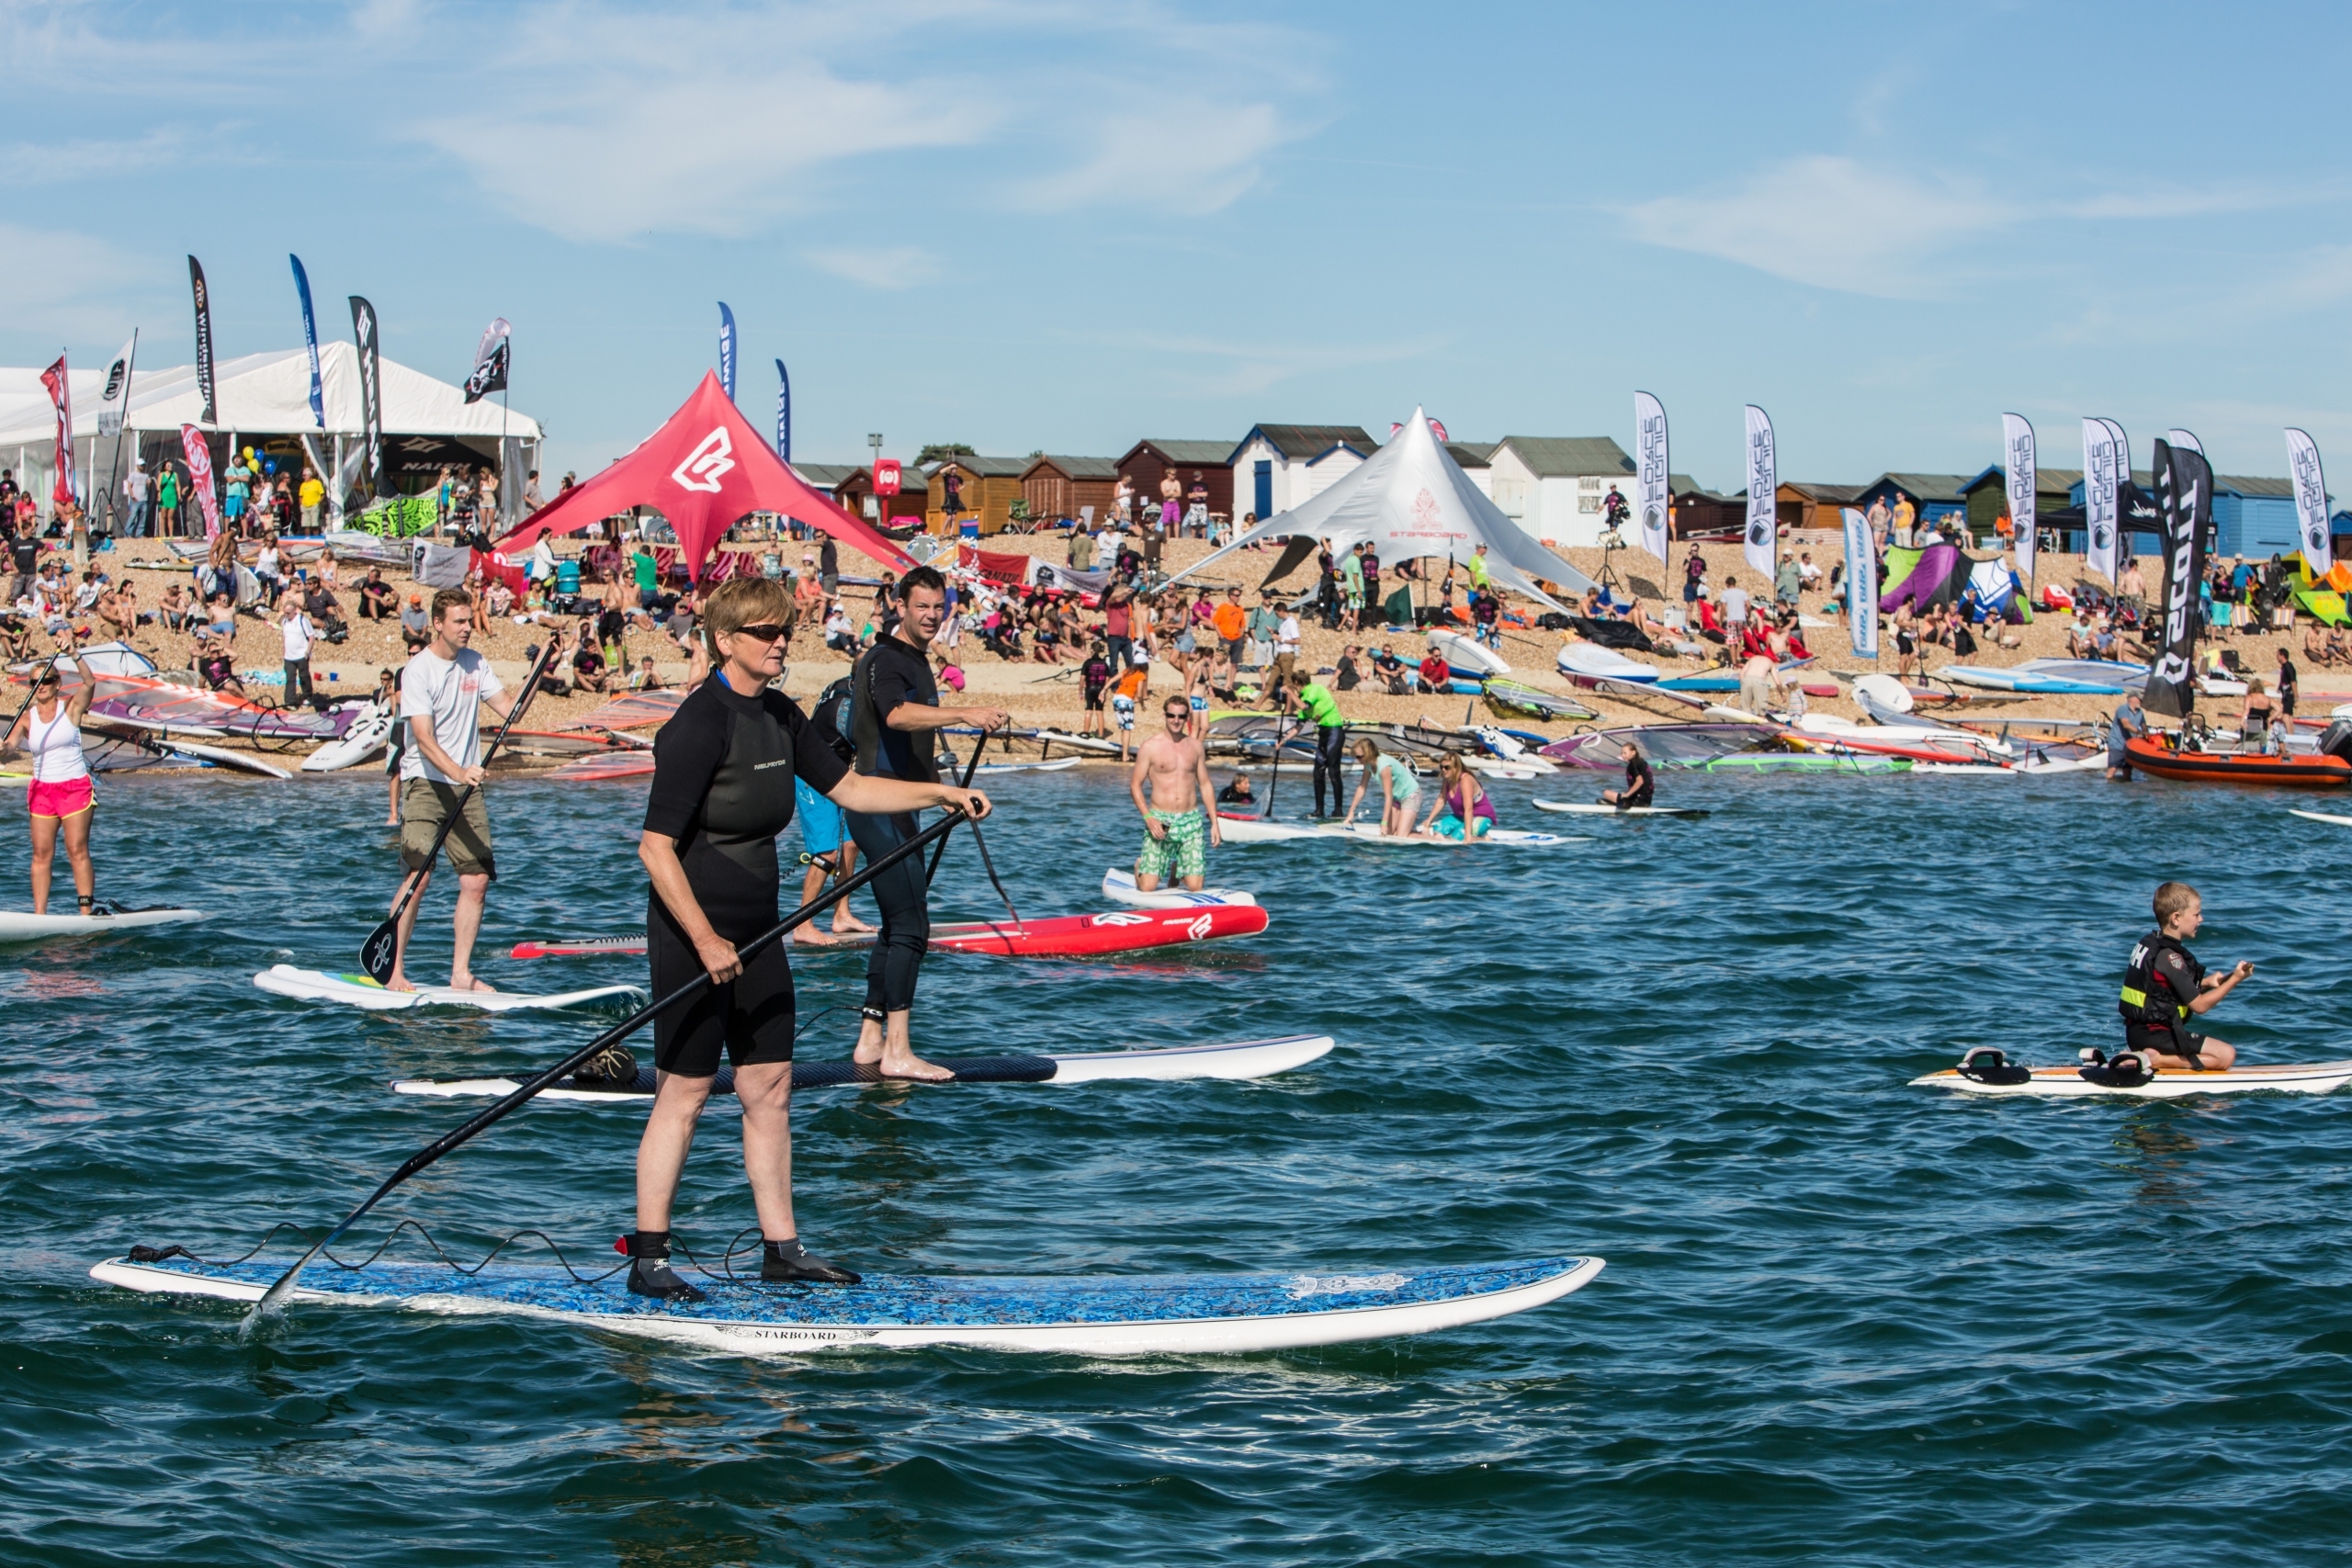 The National Watersports Festival (NWF)